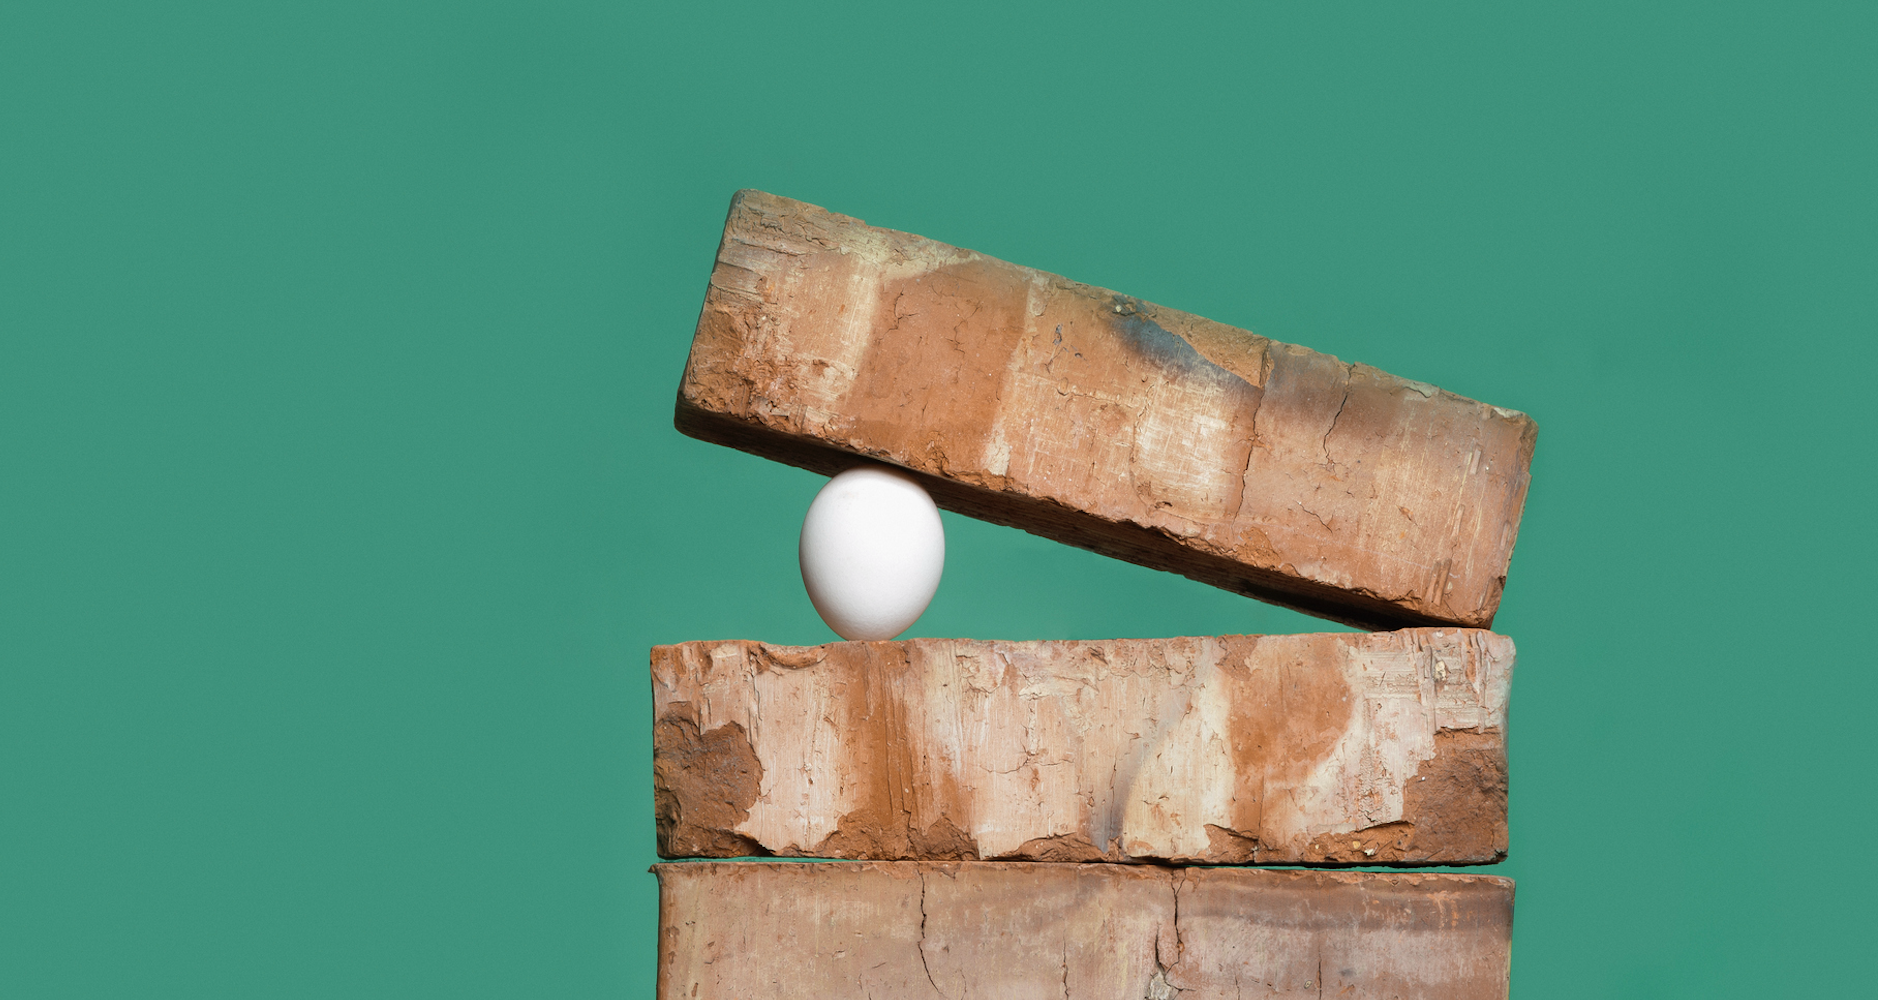 An egg sits wedged between bricks against a green background.